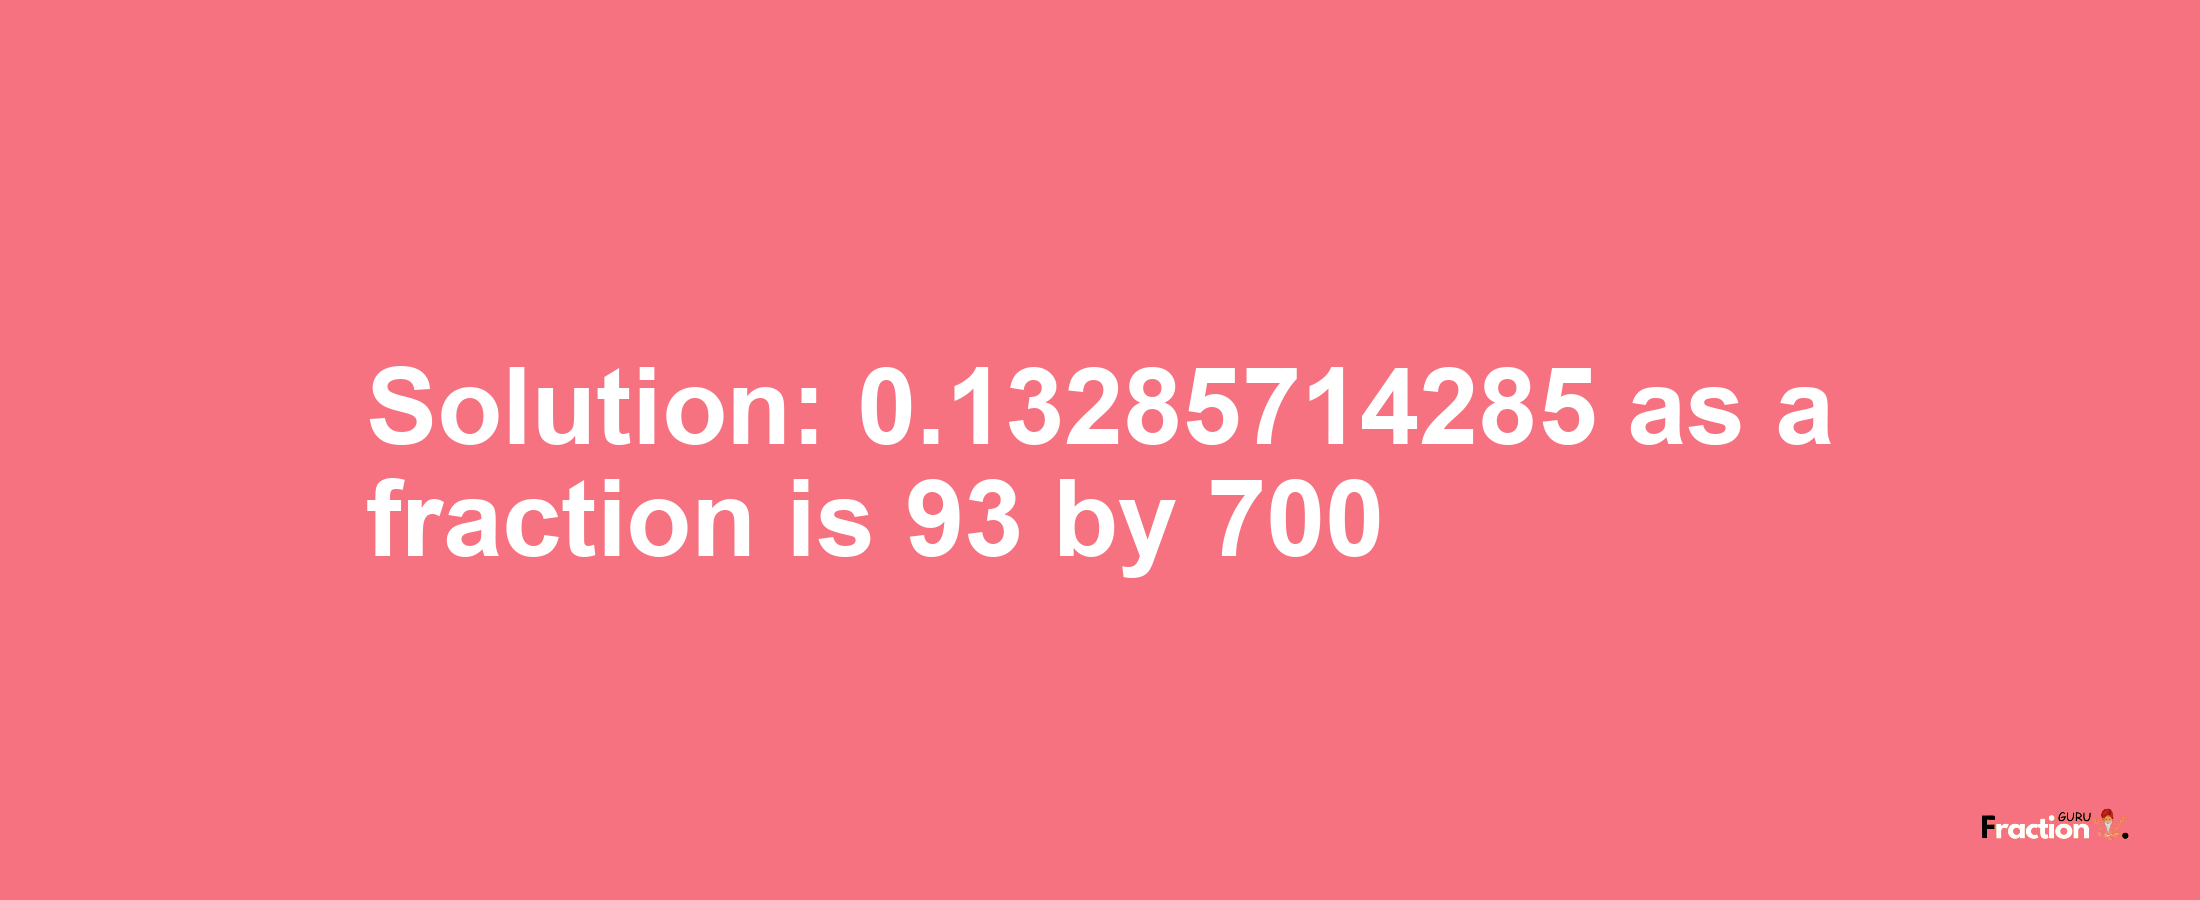 Solution:0.13285714285 as a fraction is 93/700